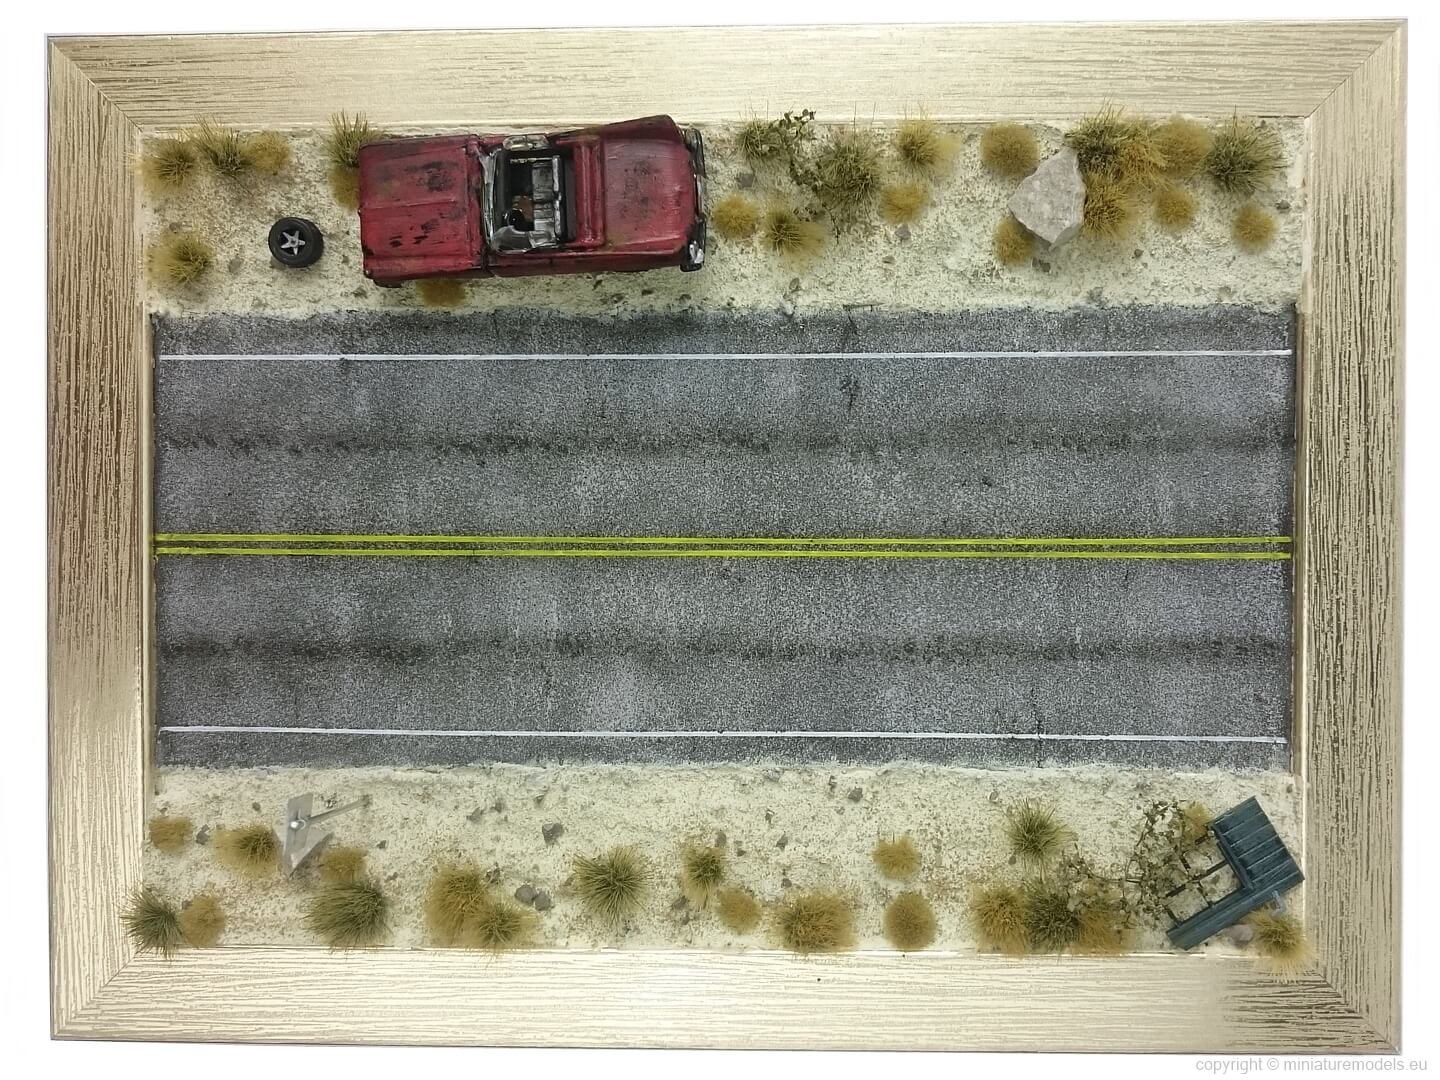 American road diorama from the top